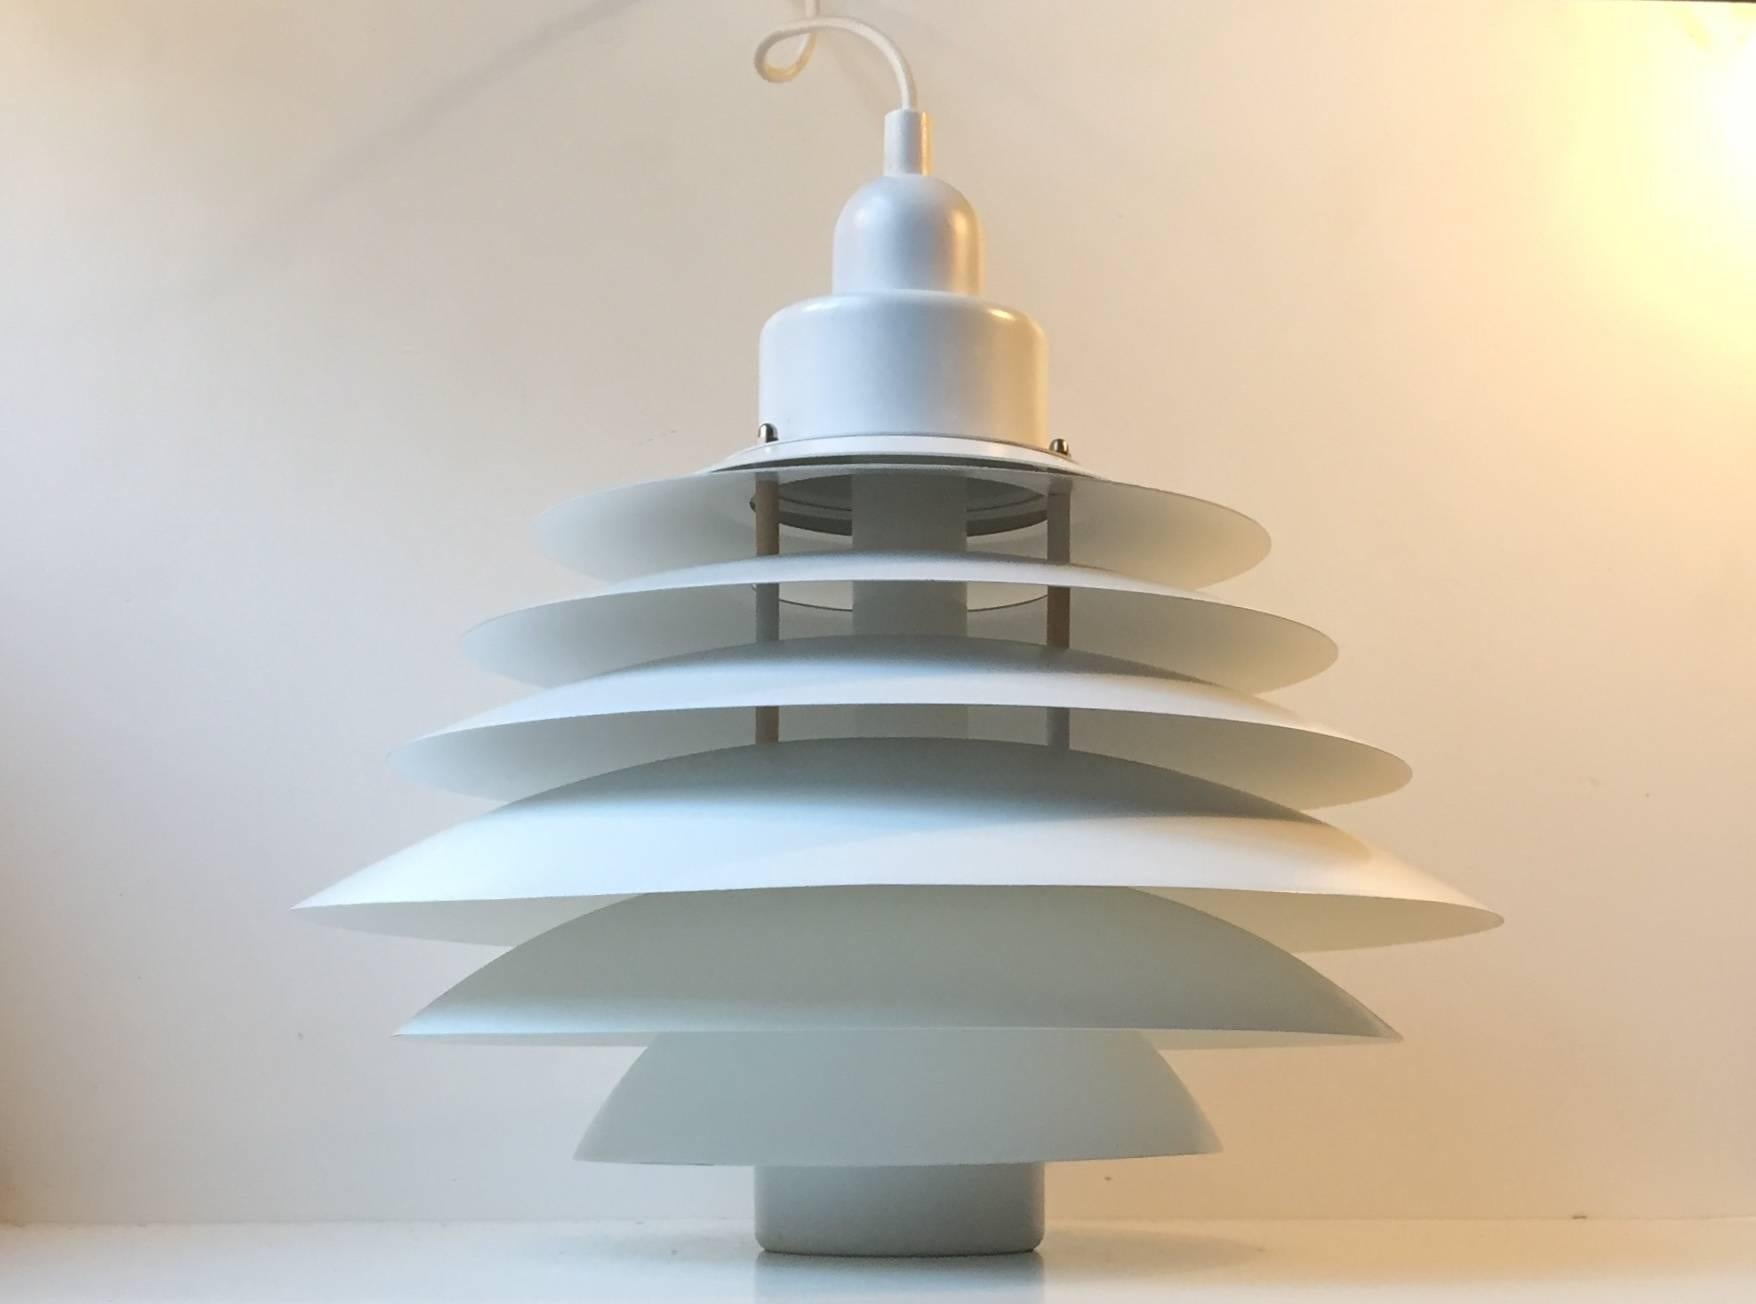 - Tiered hanging ceiling light consisting of seven shades
- Designed and manufactured by Design-Light in Denmark during the 1970s
- Reminiscent of the PH 4 and PH 5 lamps by Poul Henningsen
- It is constructed of white powder coated metal
-